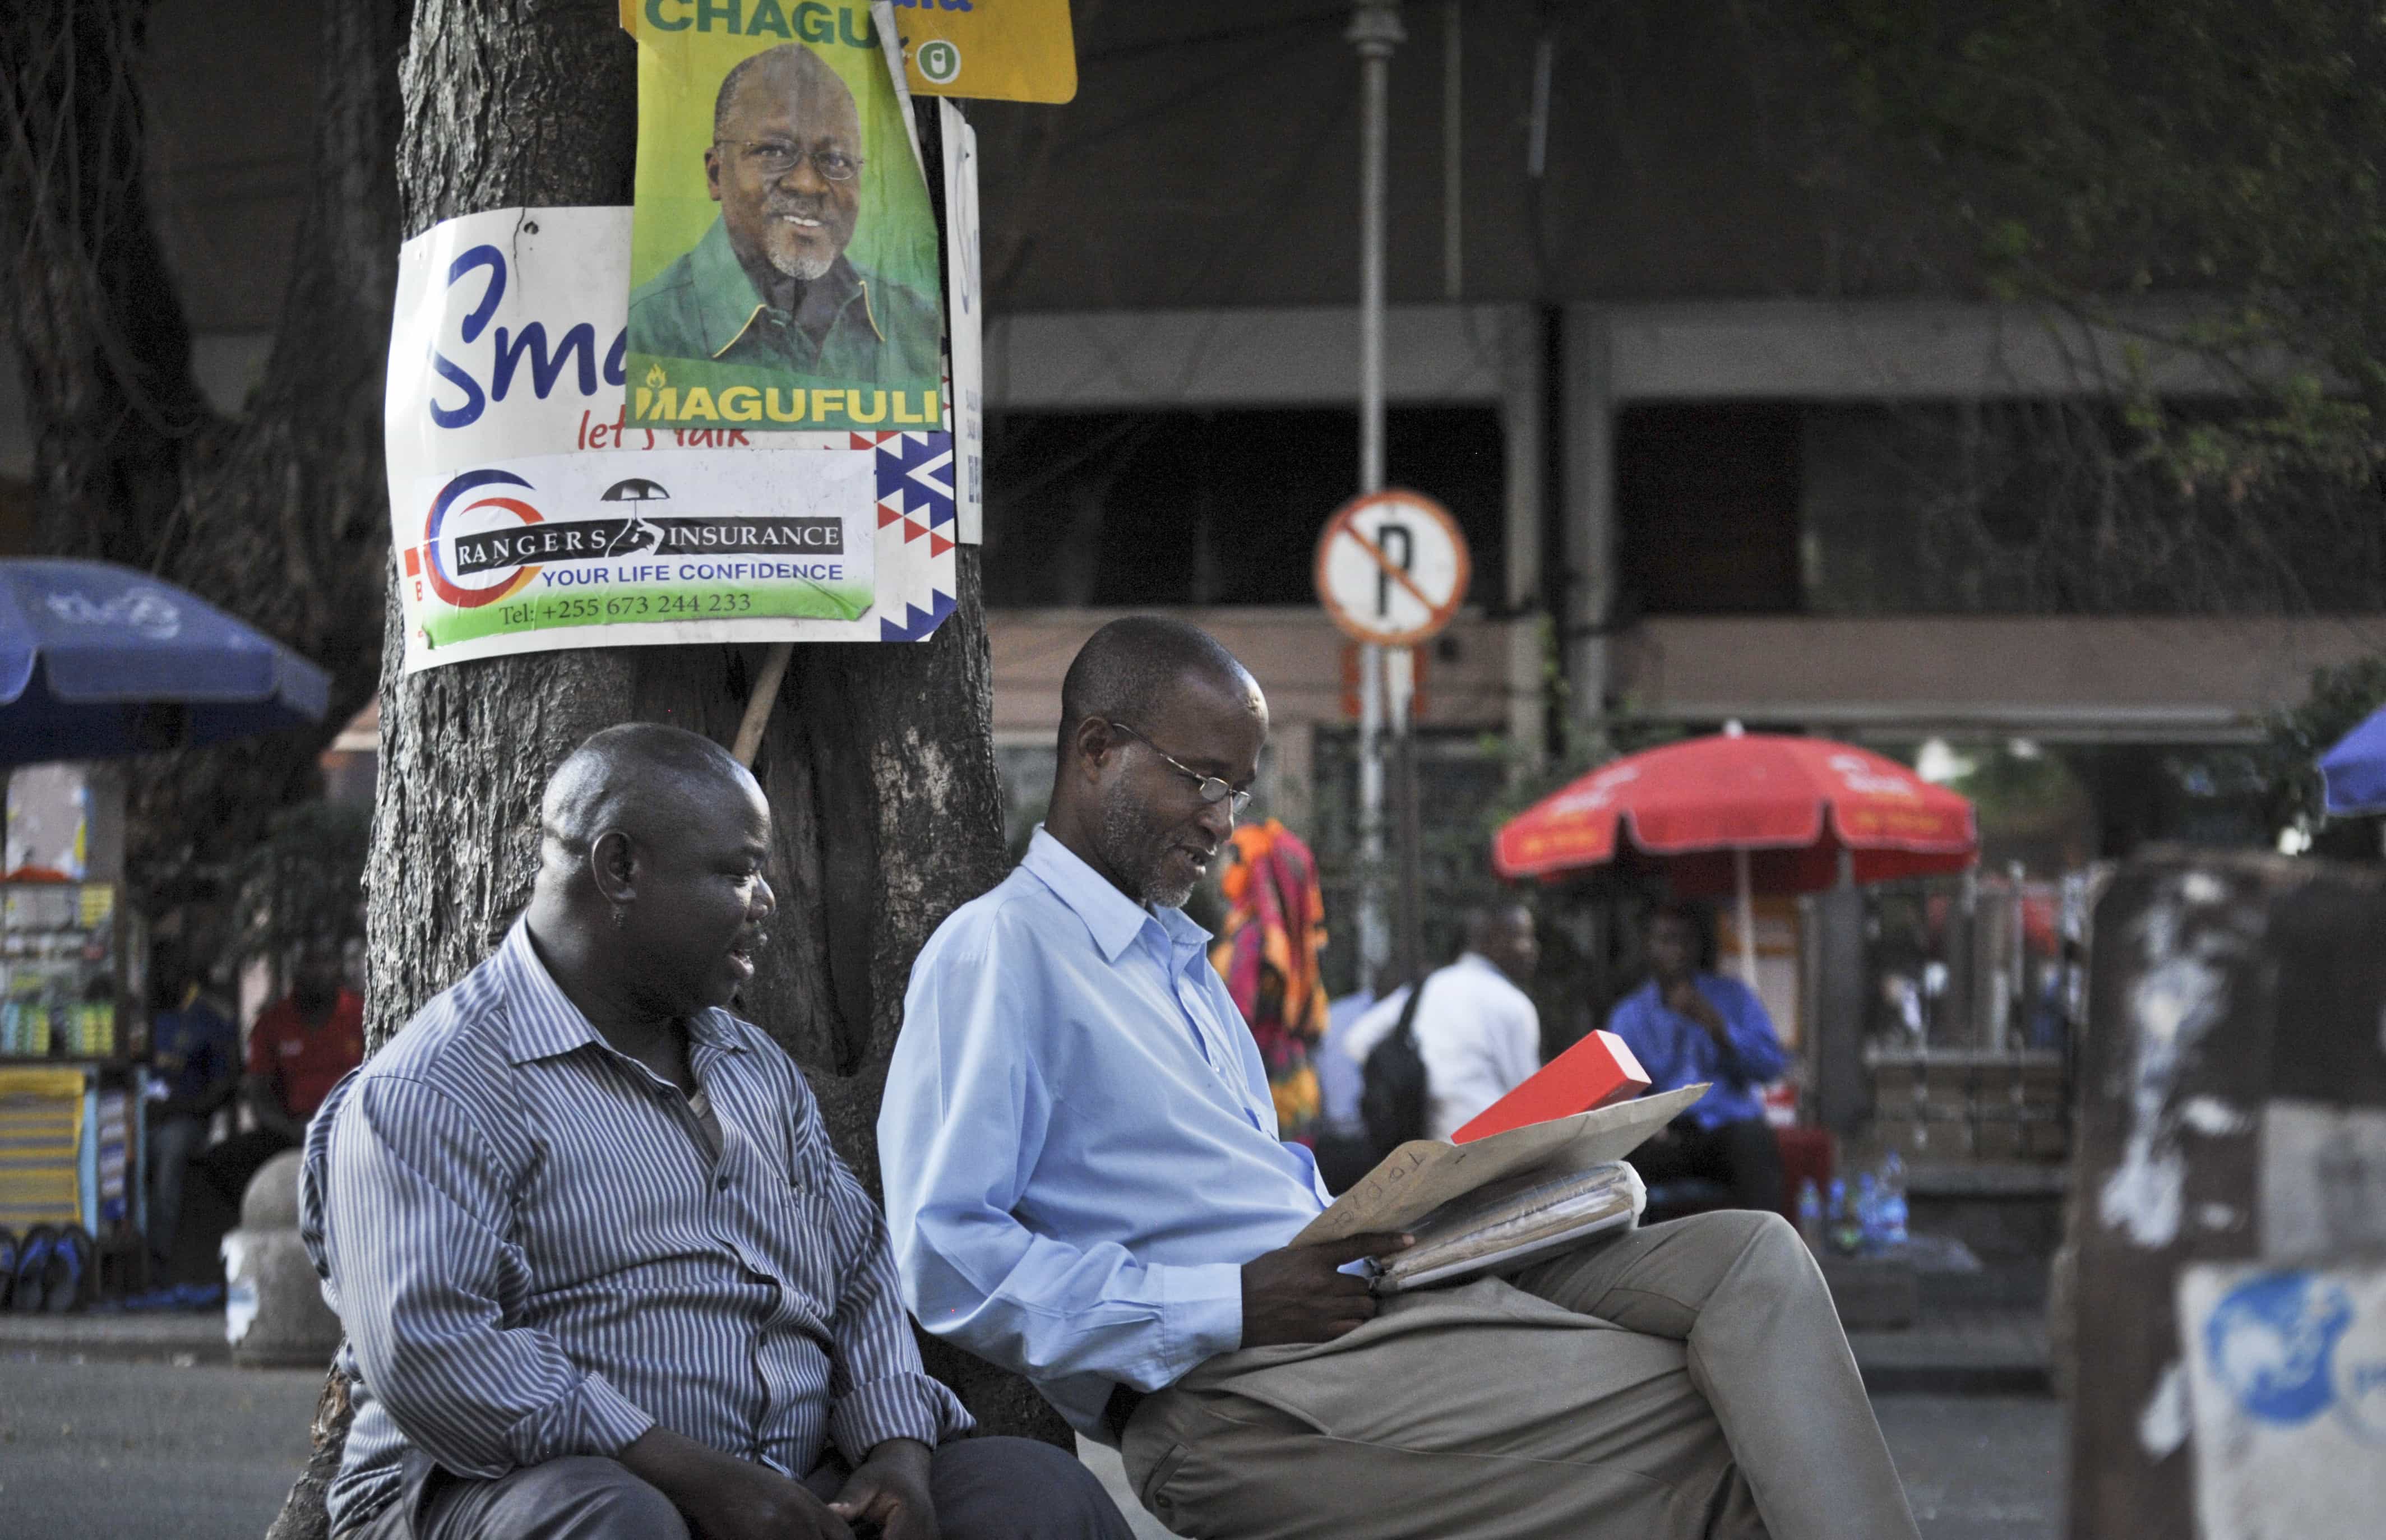 Tanzanians sit next to a tree, underneath an election poster for ruling party presidential candidate John Magufuli, as they await election results in Dar es Salaam, Tanzania 27 October 2015, AP Photo/Khalfan Said